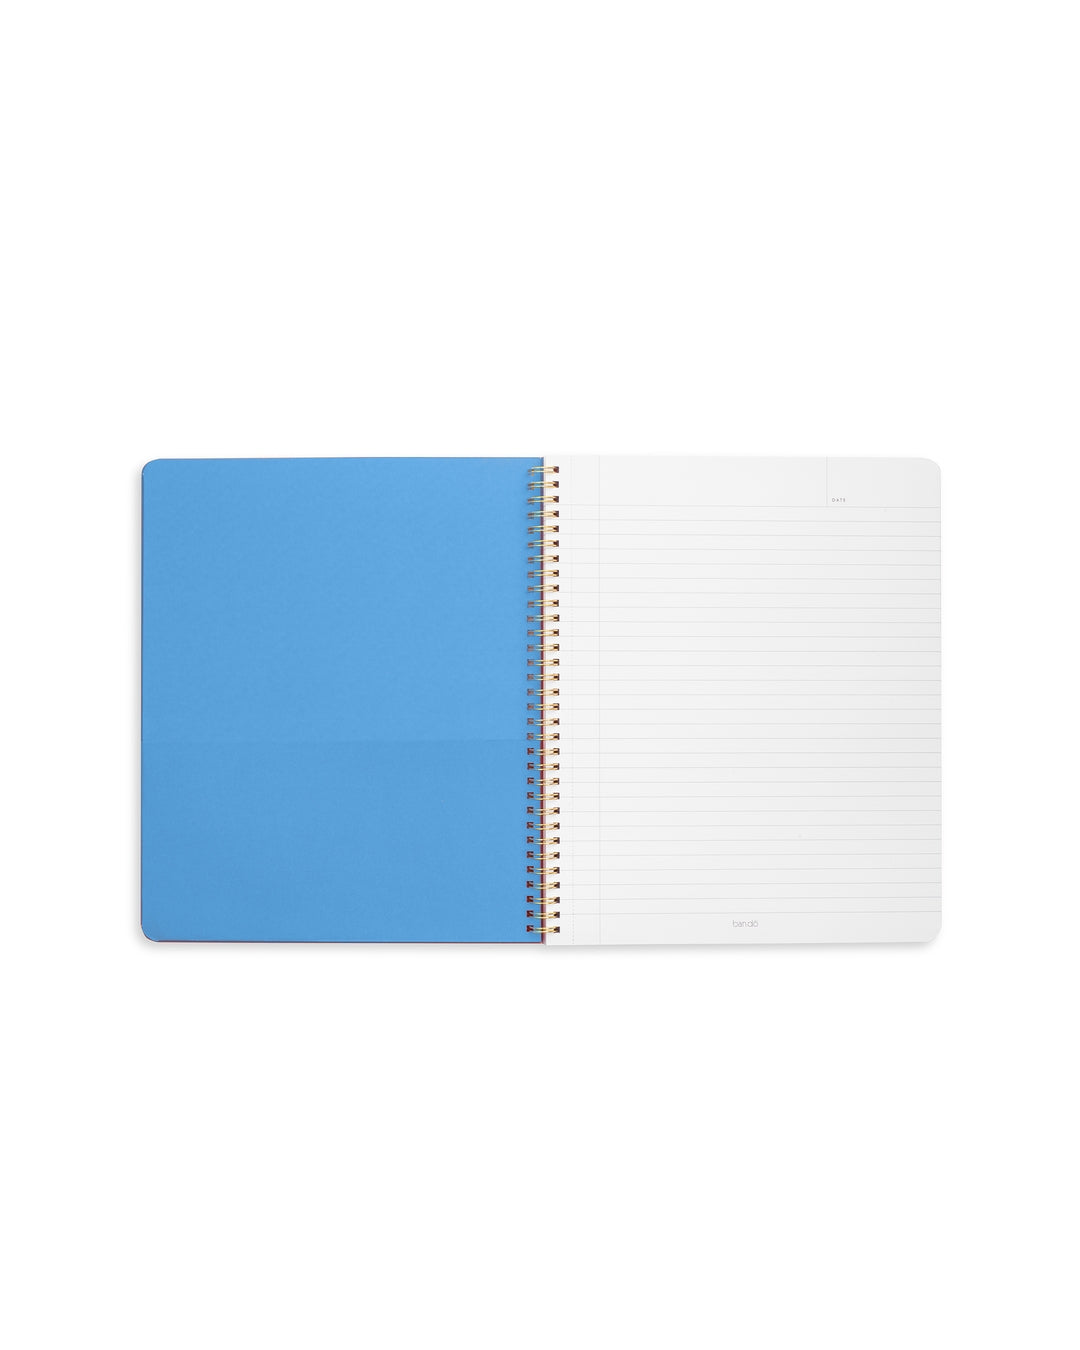 Rough Draft Large Notebook - Only The Good Stuff [PRE ORDER]